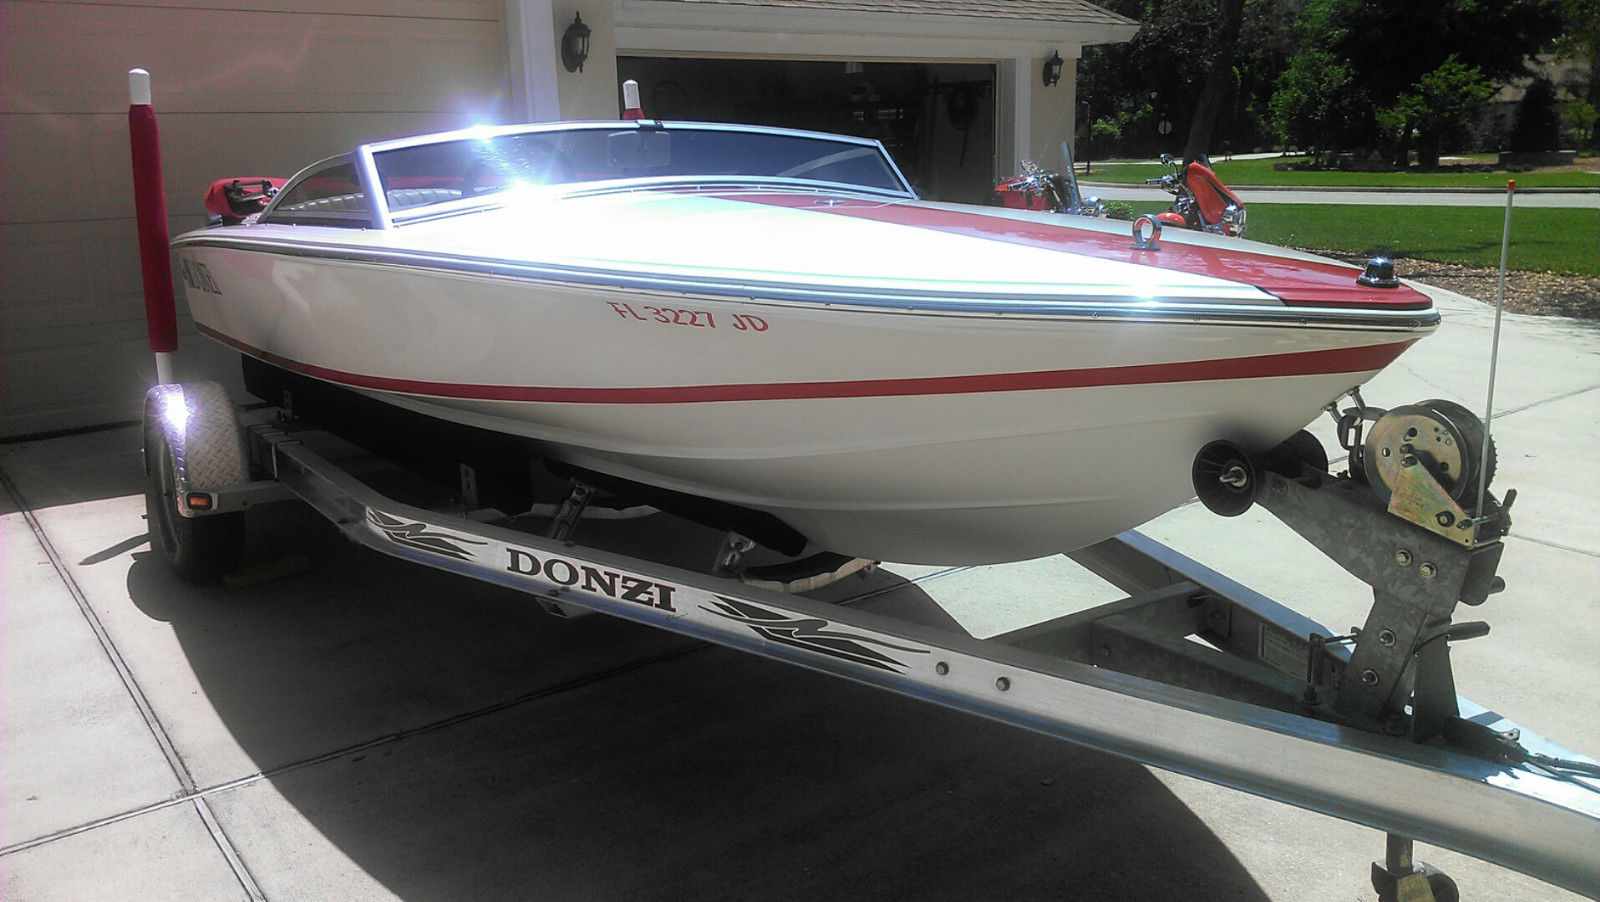 Donzi 18 Classic 1994 for sale for $19,900.